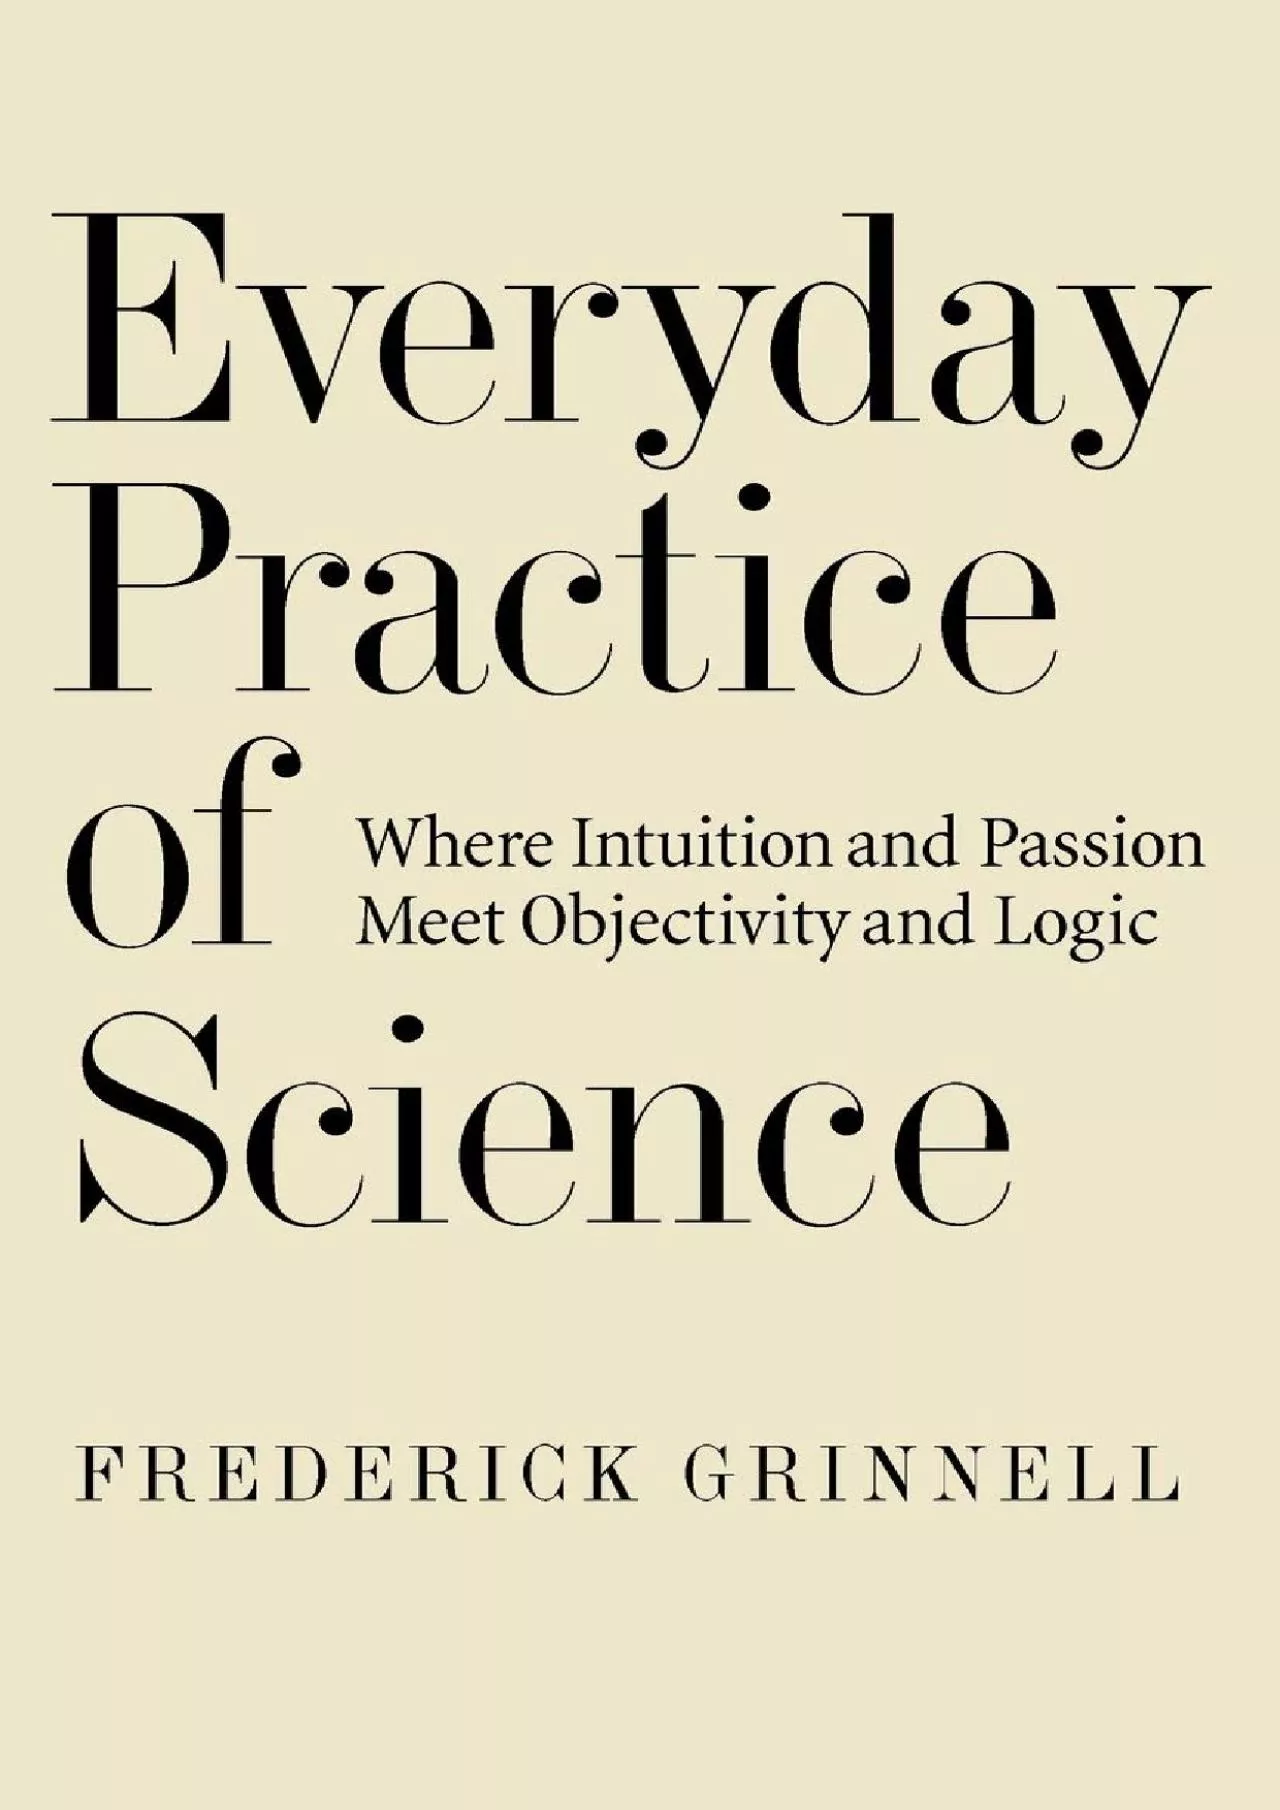 (EBOOK)-Everyday Practice of Science: Where Intuition and Passion Meet Objectivity and